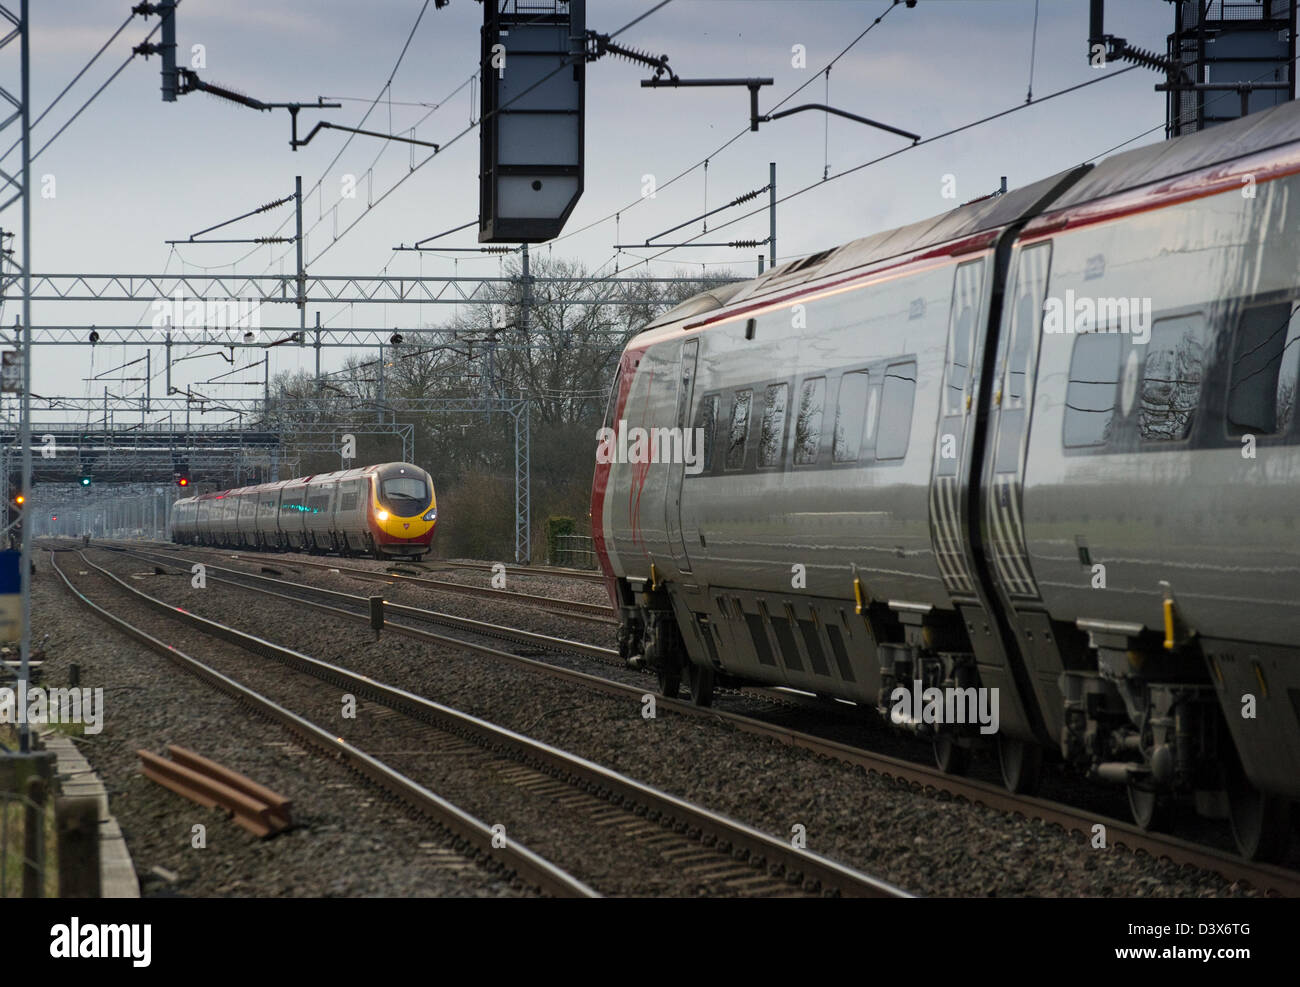 Class 390 Pendolinos approach one another at speed on the WCML near Rugby, Warwickshire on 21 February 2013 Stock Photo